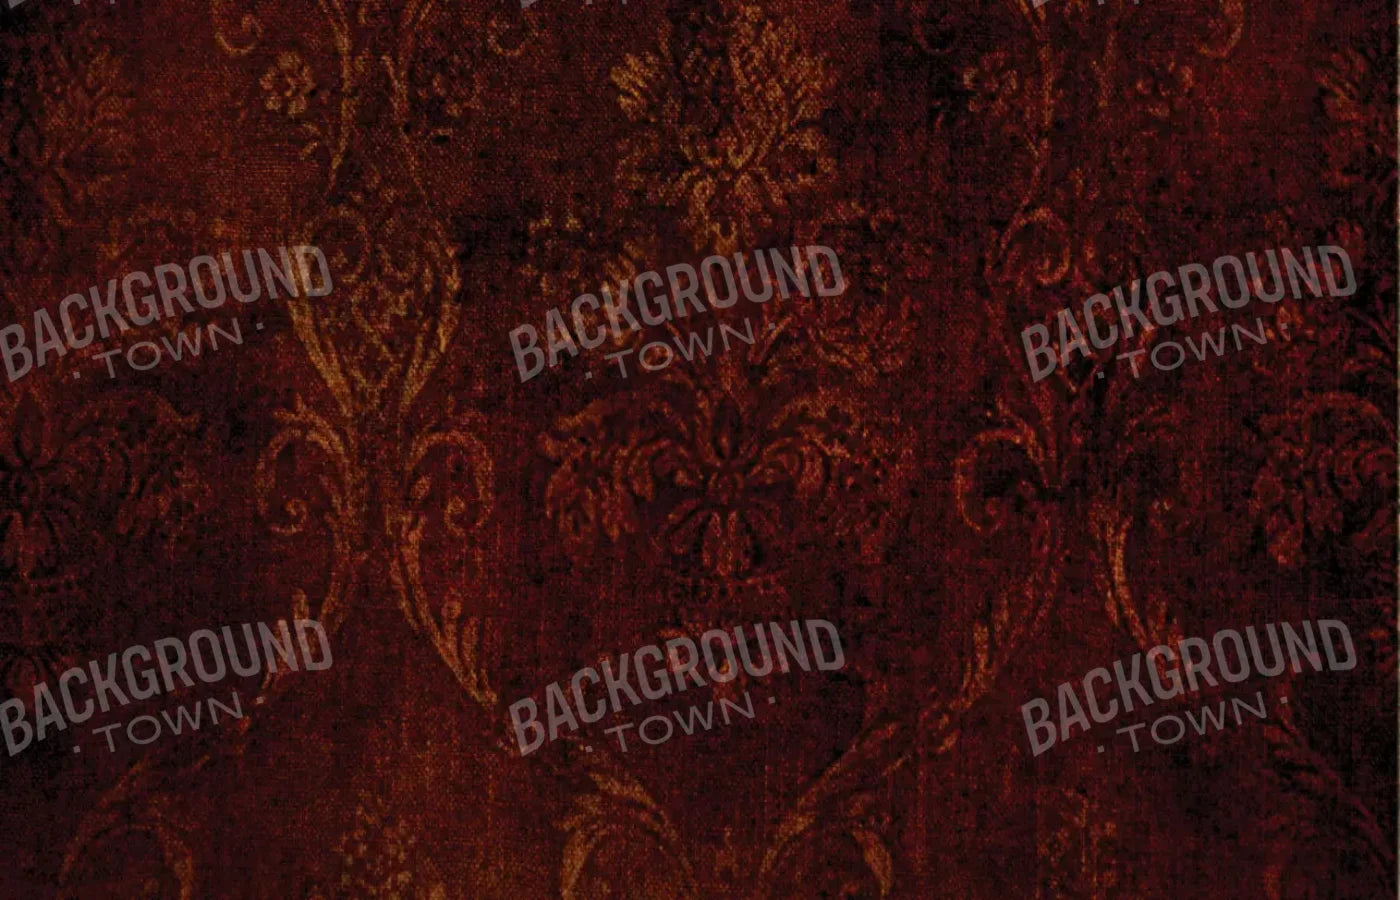 Boudoir Red 12X8 Ultracloth ( 144 X 96 Inch ) Backdrop